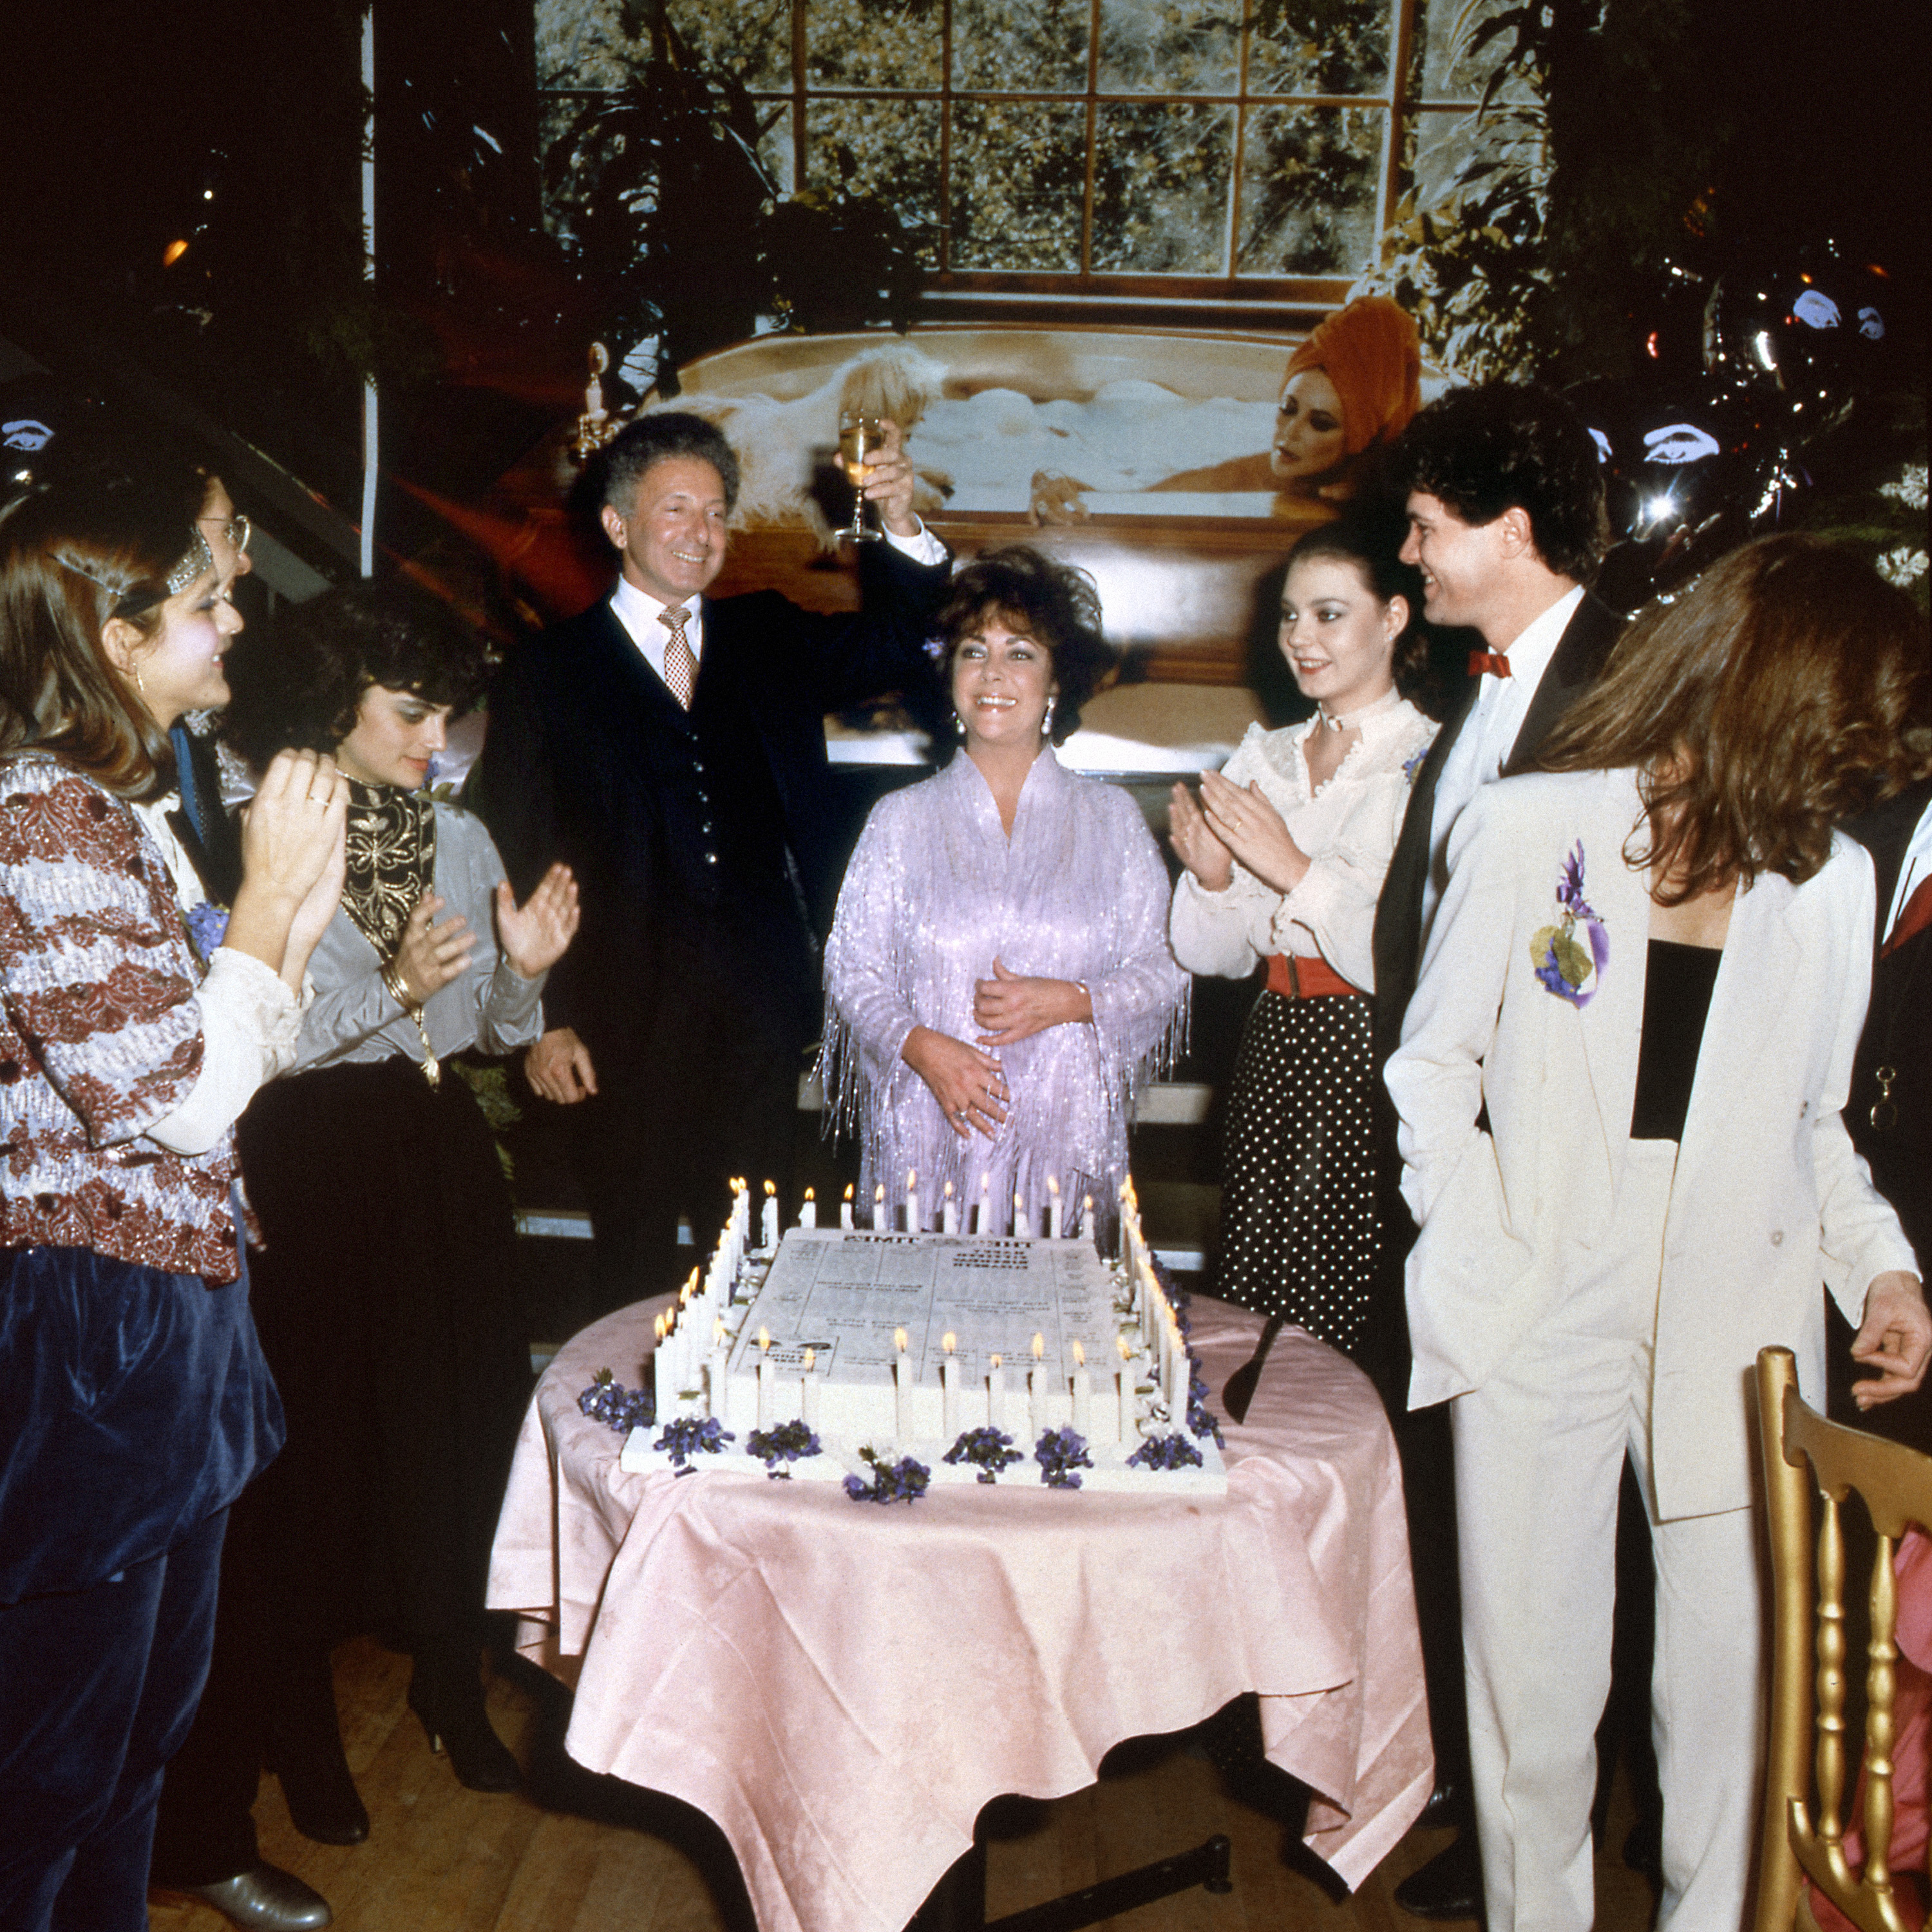 Theater producer Zev Bufman toasts to actress Elizabeth Taylor (C) during her 50th birthday party at Legends, Others are (2nd L) son-in-law Steven Carson, and his wife, Maria, daughter of Liz and Richard Burton, daughter Liza Todd, Hap Tivey and Aileen Getty-Wilding, | Source: Getty Images